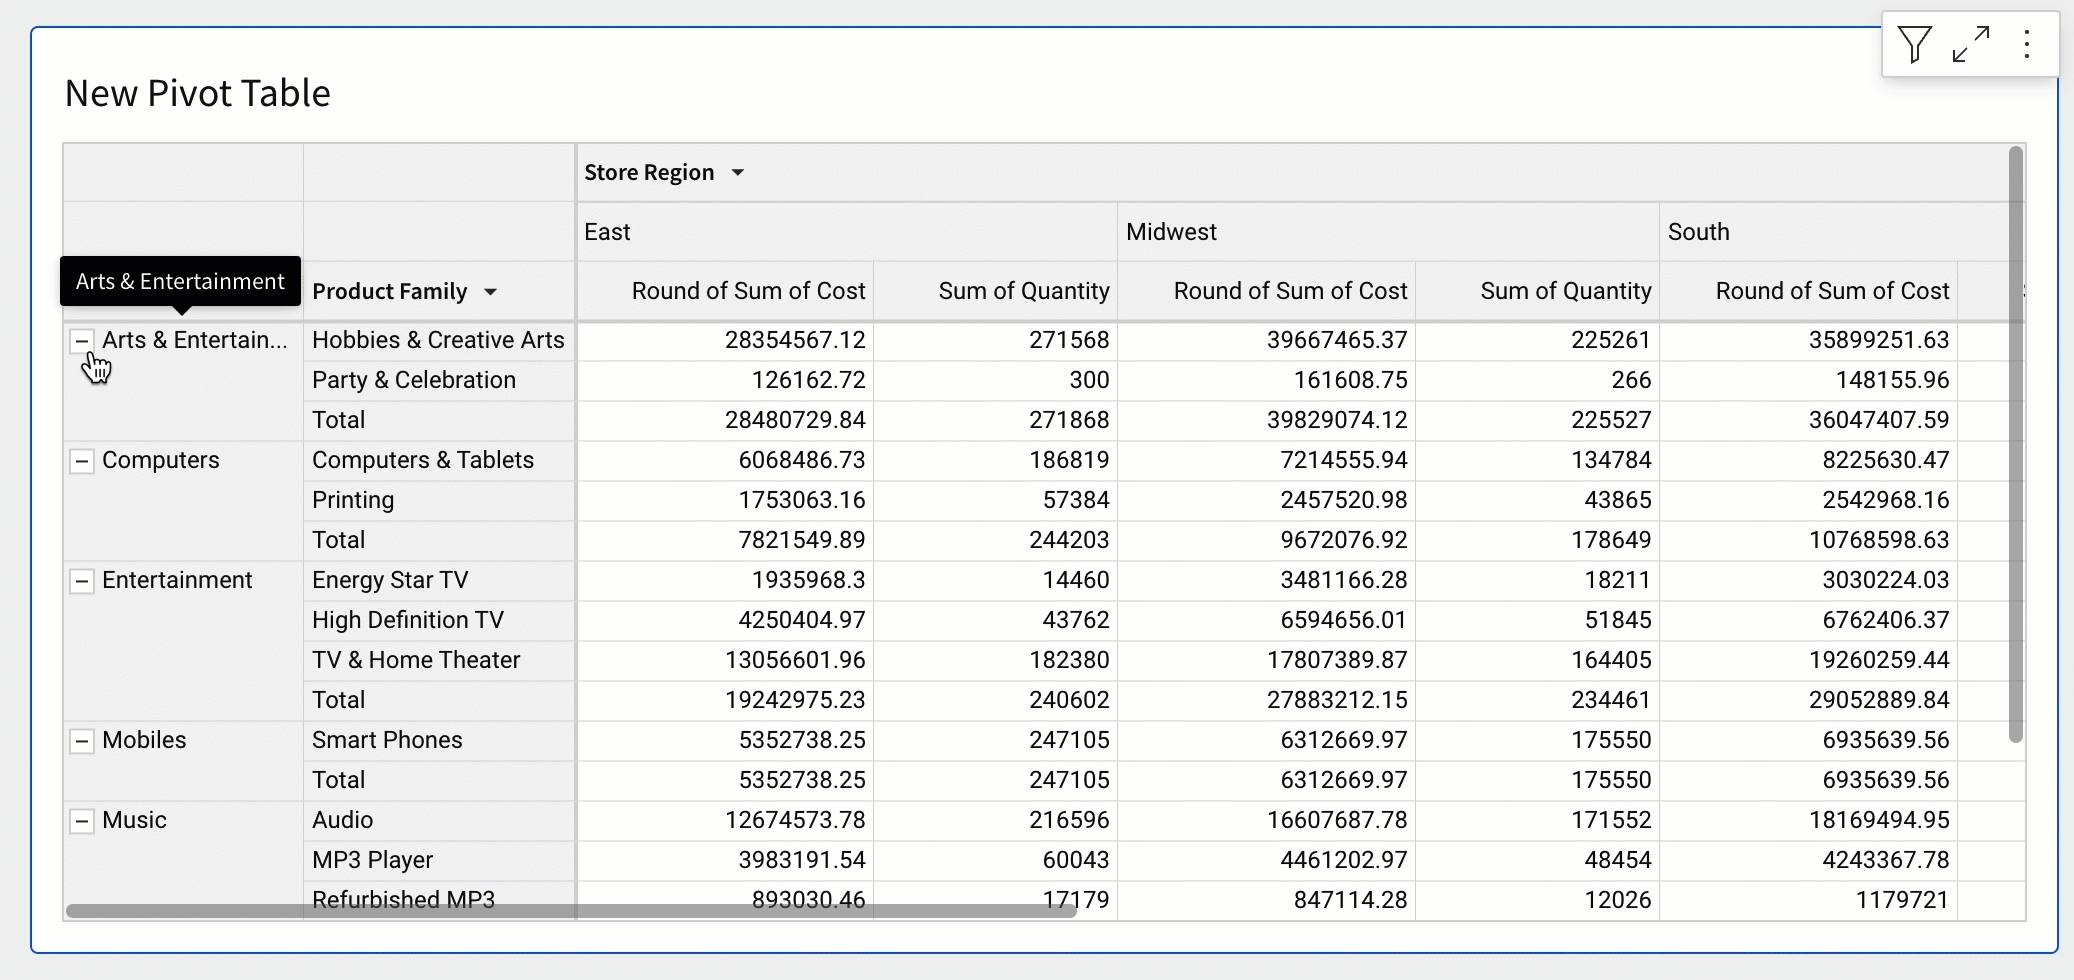 Gif showing a pivot table with multiple rows and columns being collapsed with the - option.